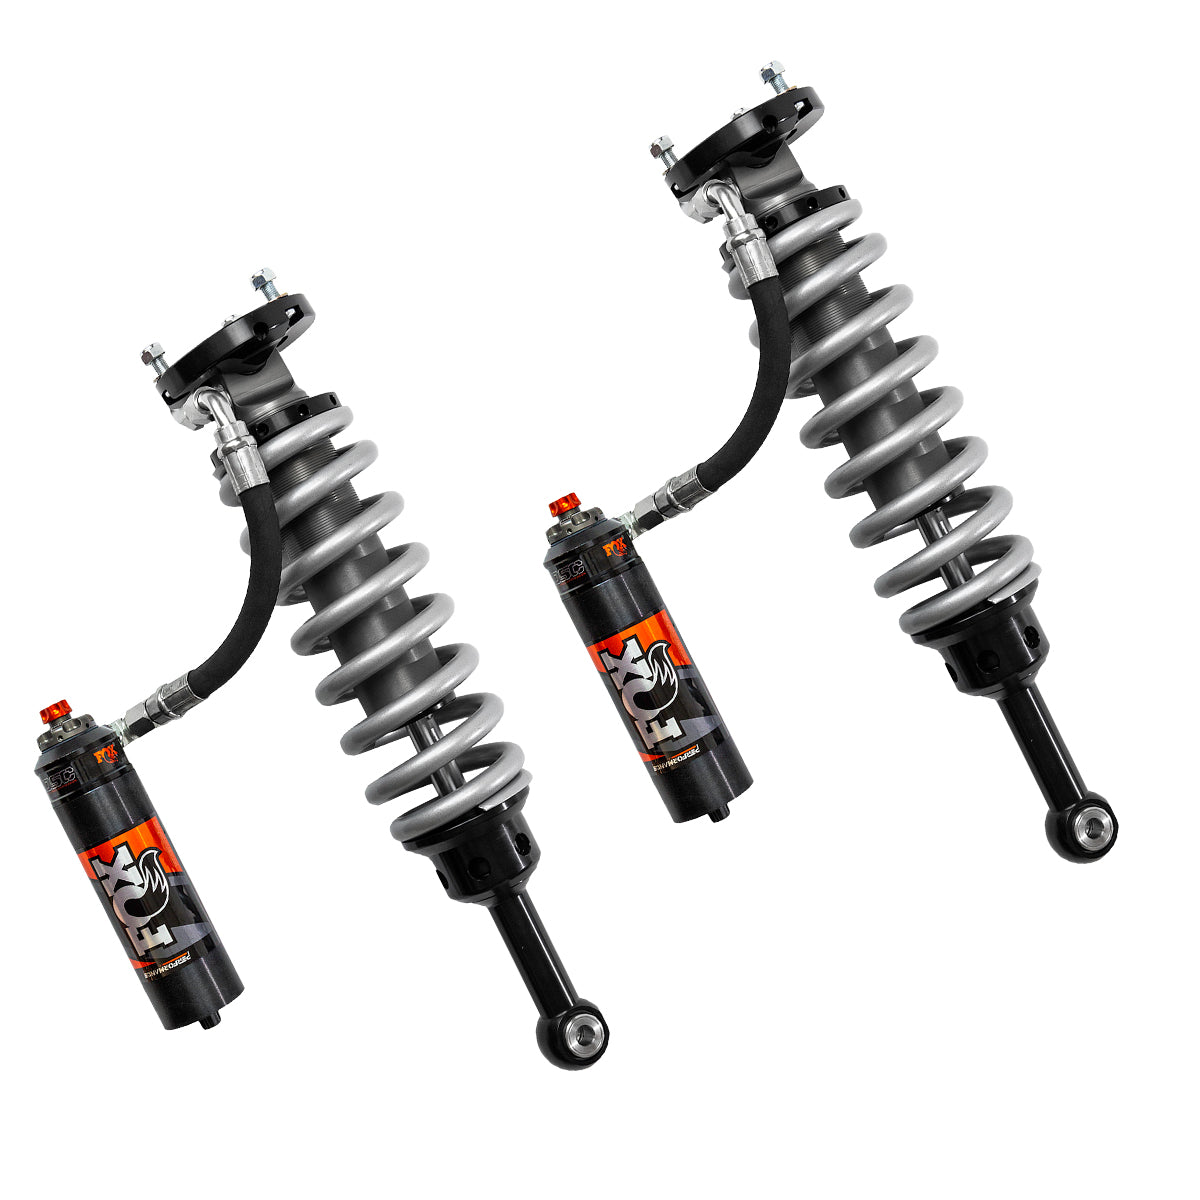 '05-23 Toyota Tacoma Fox Performance Elite Series RR 2.5 Front Coilovers display